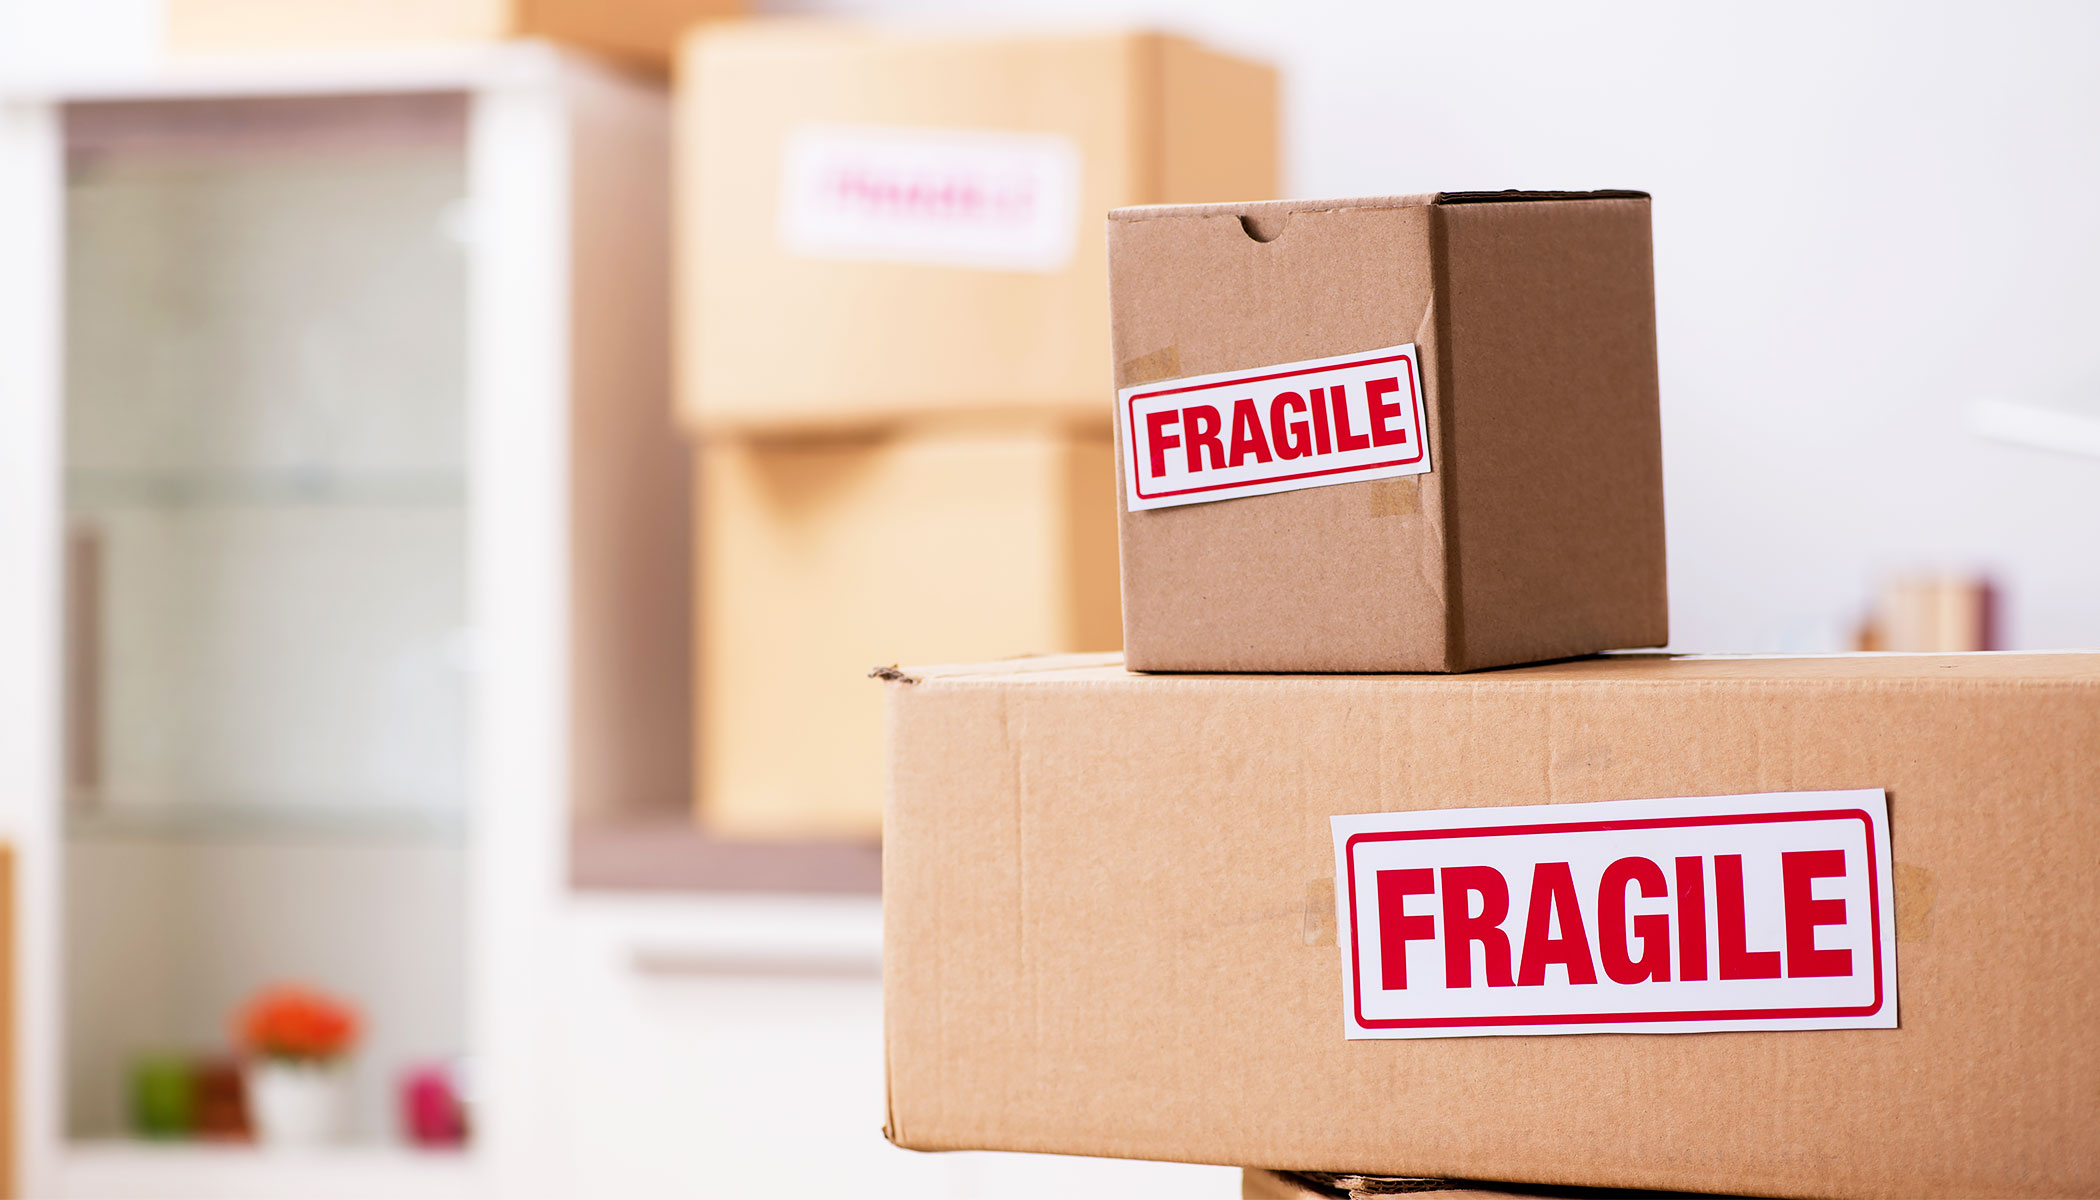 FRAGILE BOXES: HOW TO PACK THEM